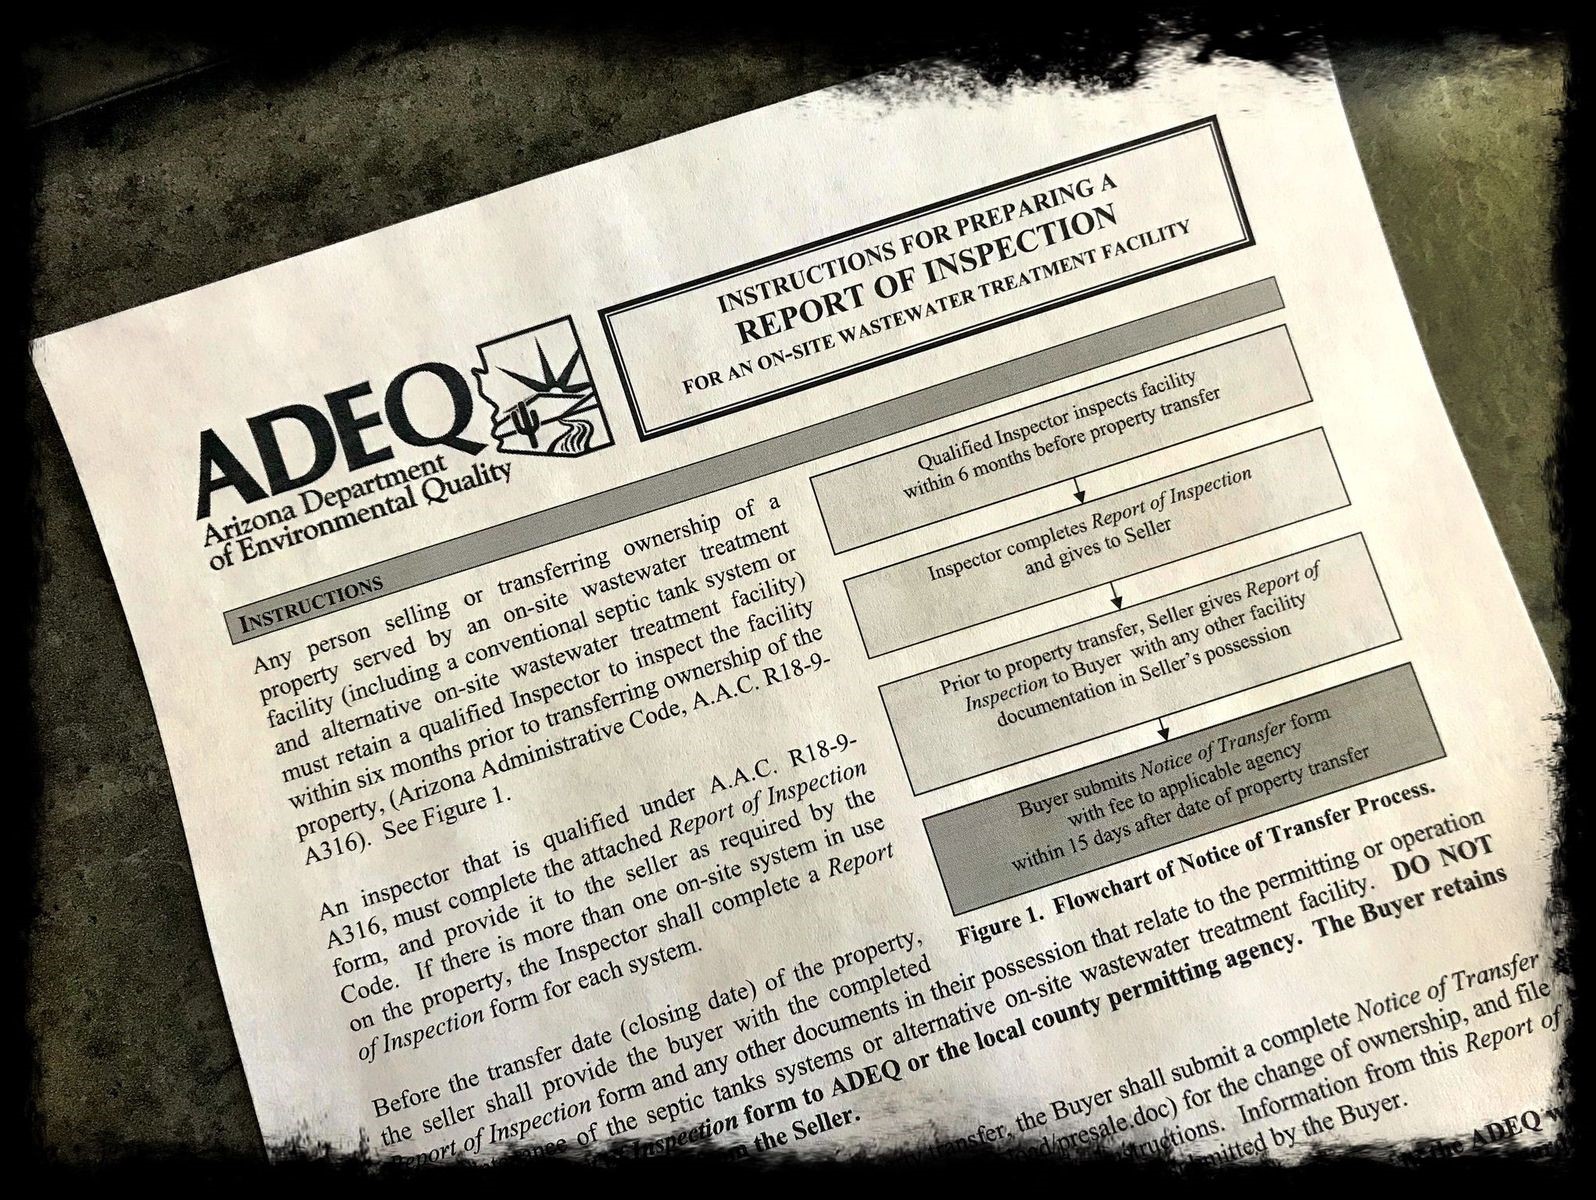 ADEQ Septic Inspection Report